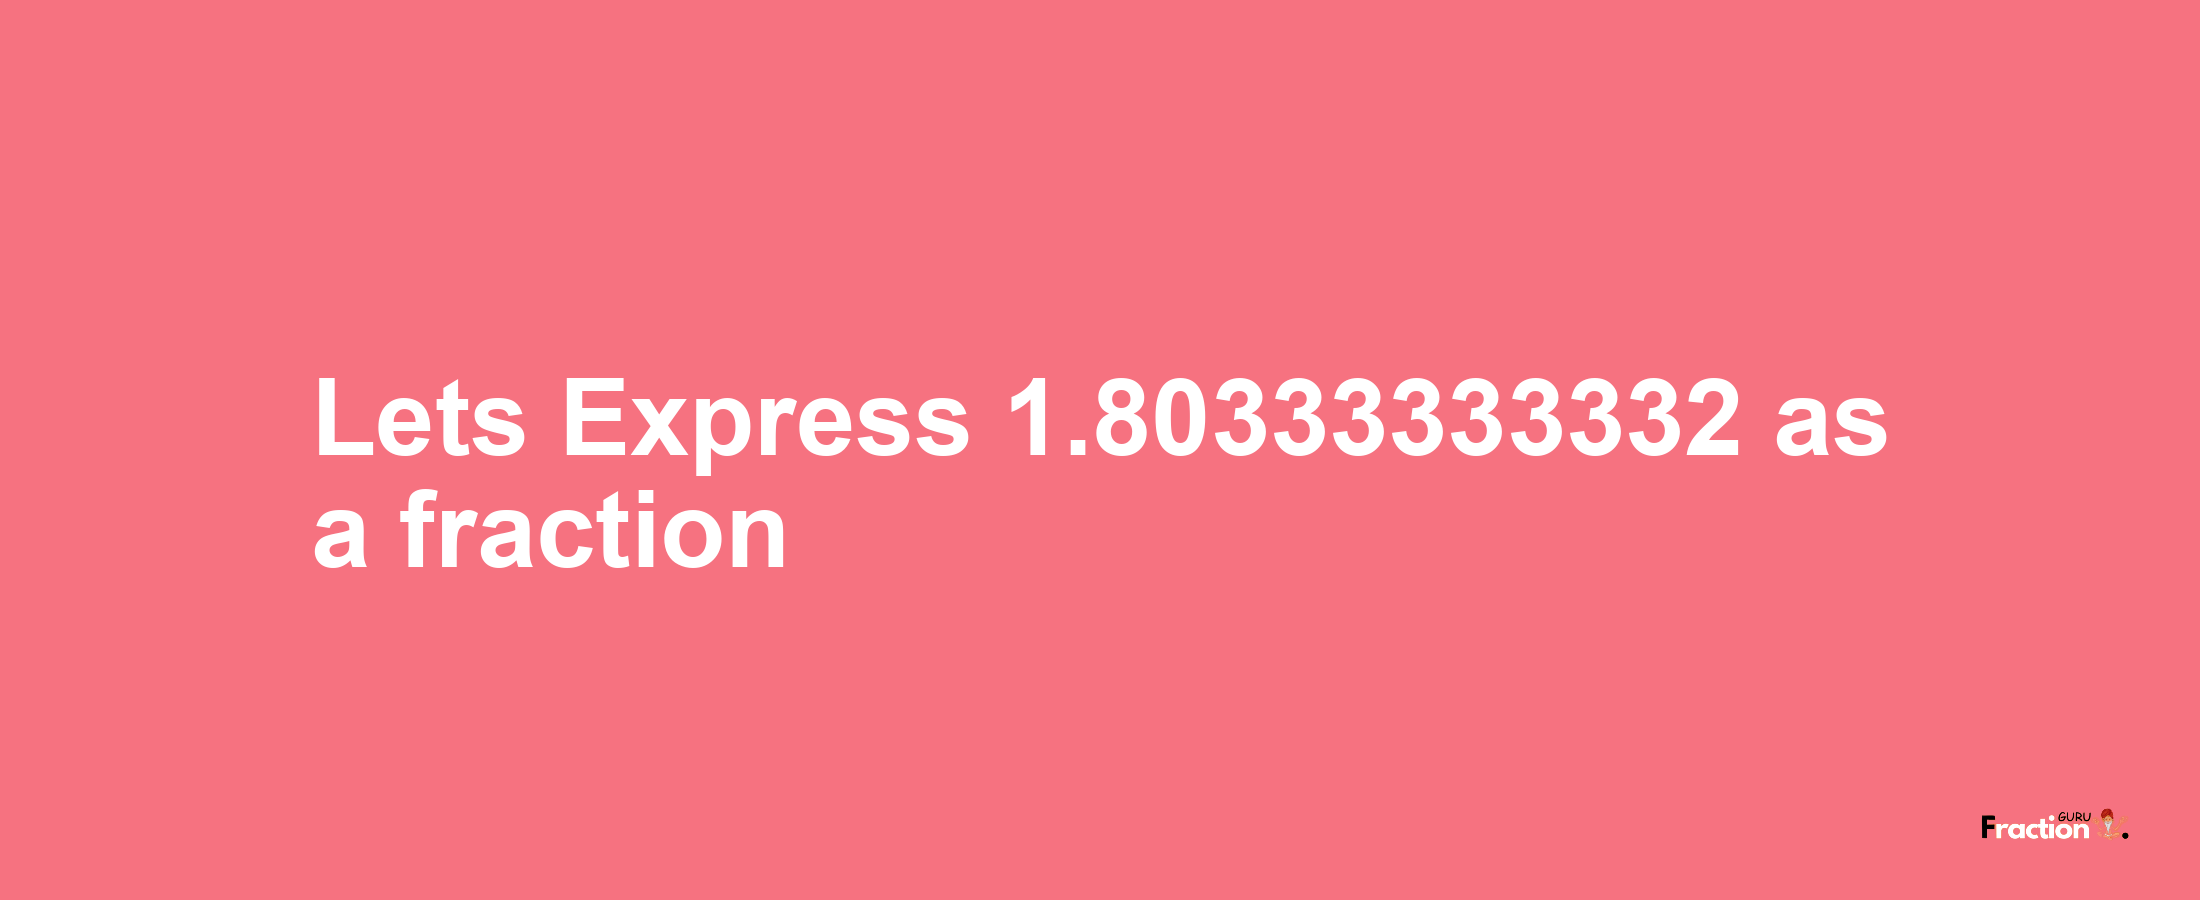 Lets Express 1.80333333332 as afraction